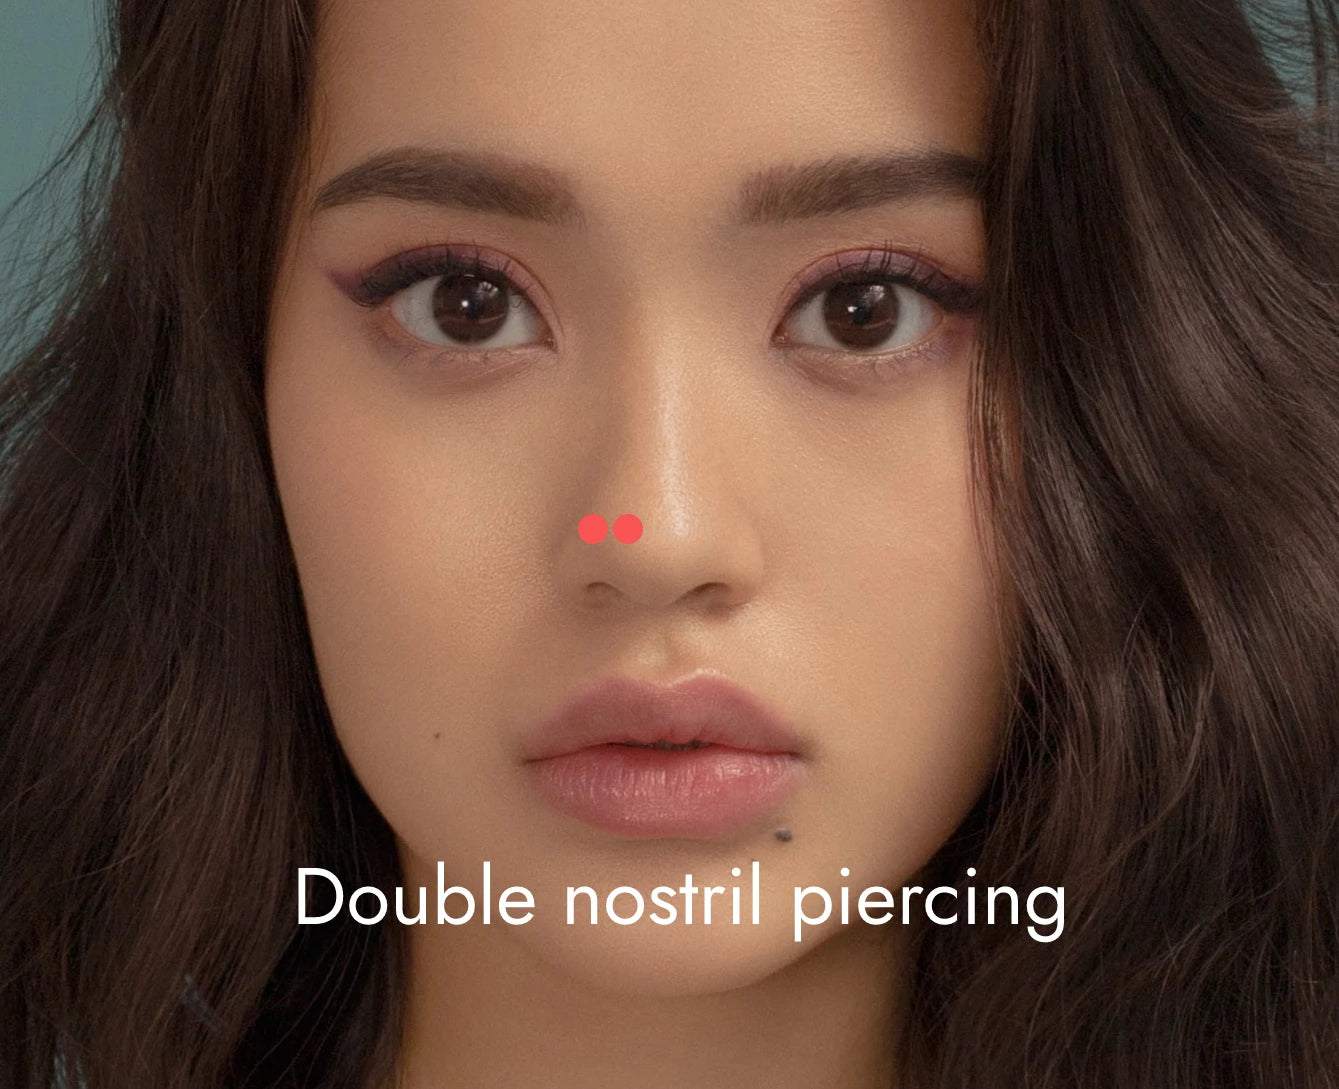 Double nose piercing: Pros, cons, and suitable jewelry